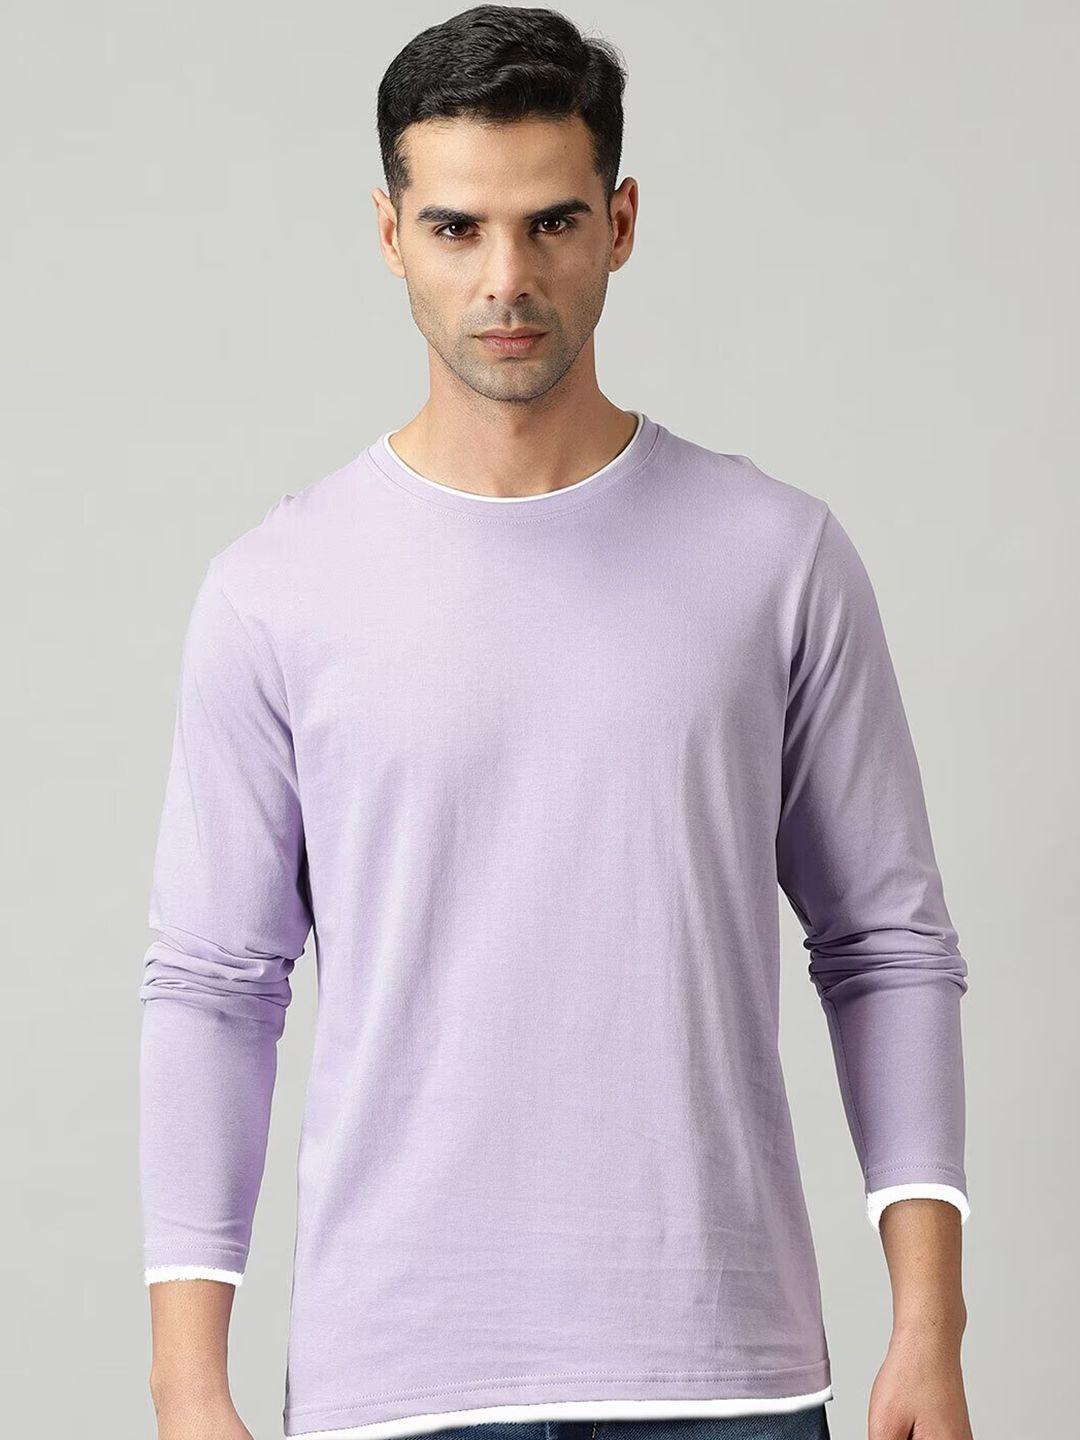 the hollander round neck long sleeves pure cotton t-shirt